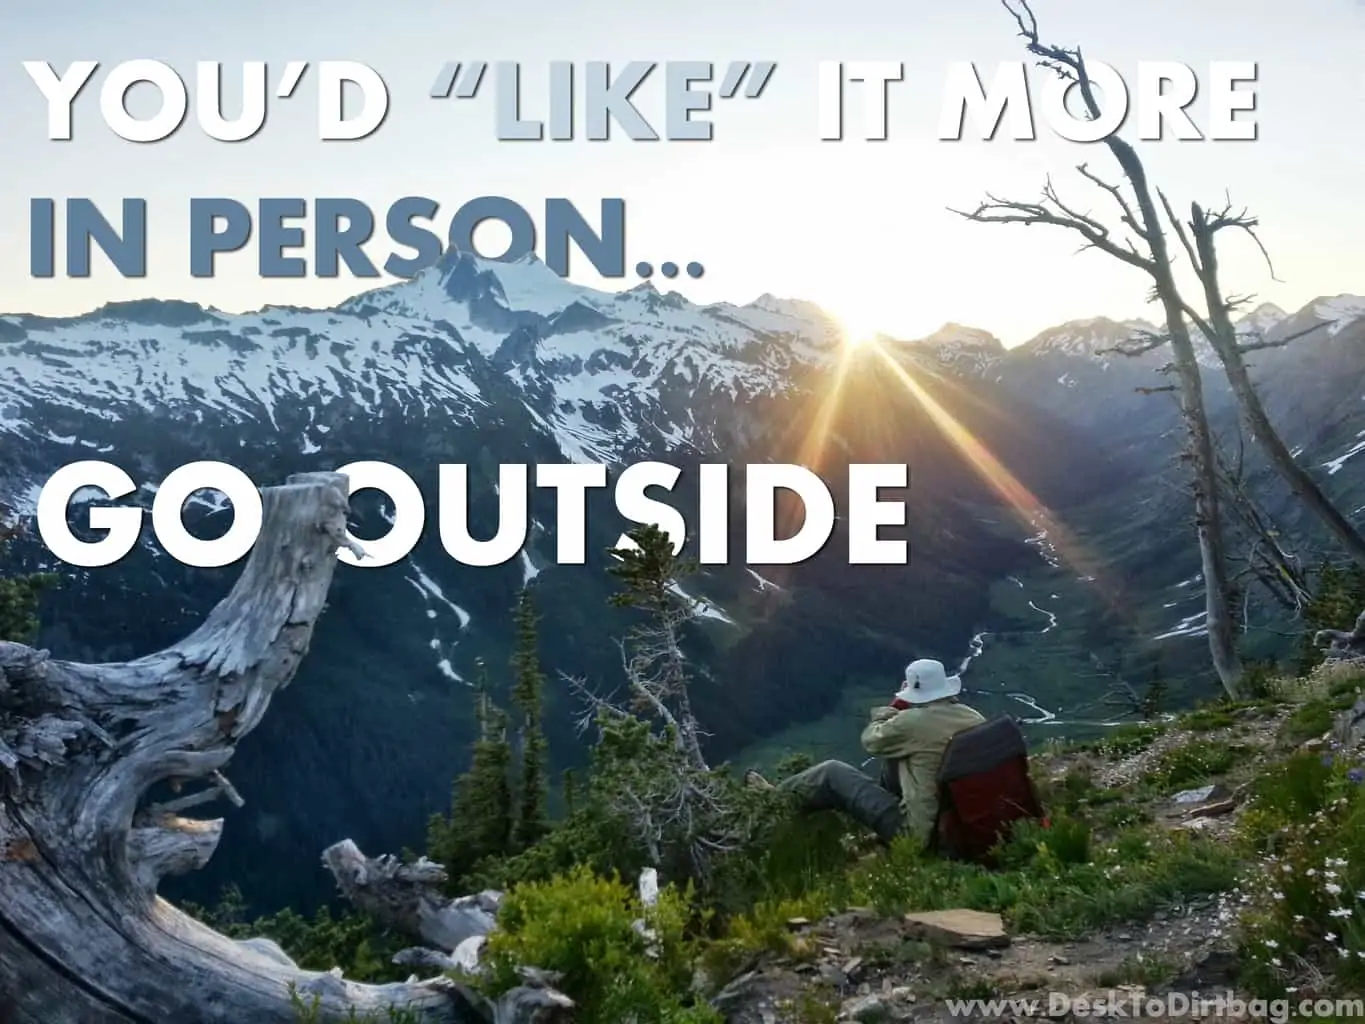 Go Outside: Life is too short to watch it pass by from a desk...